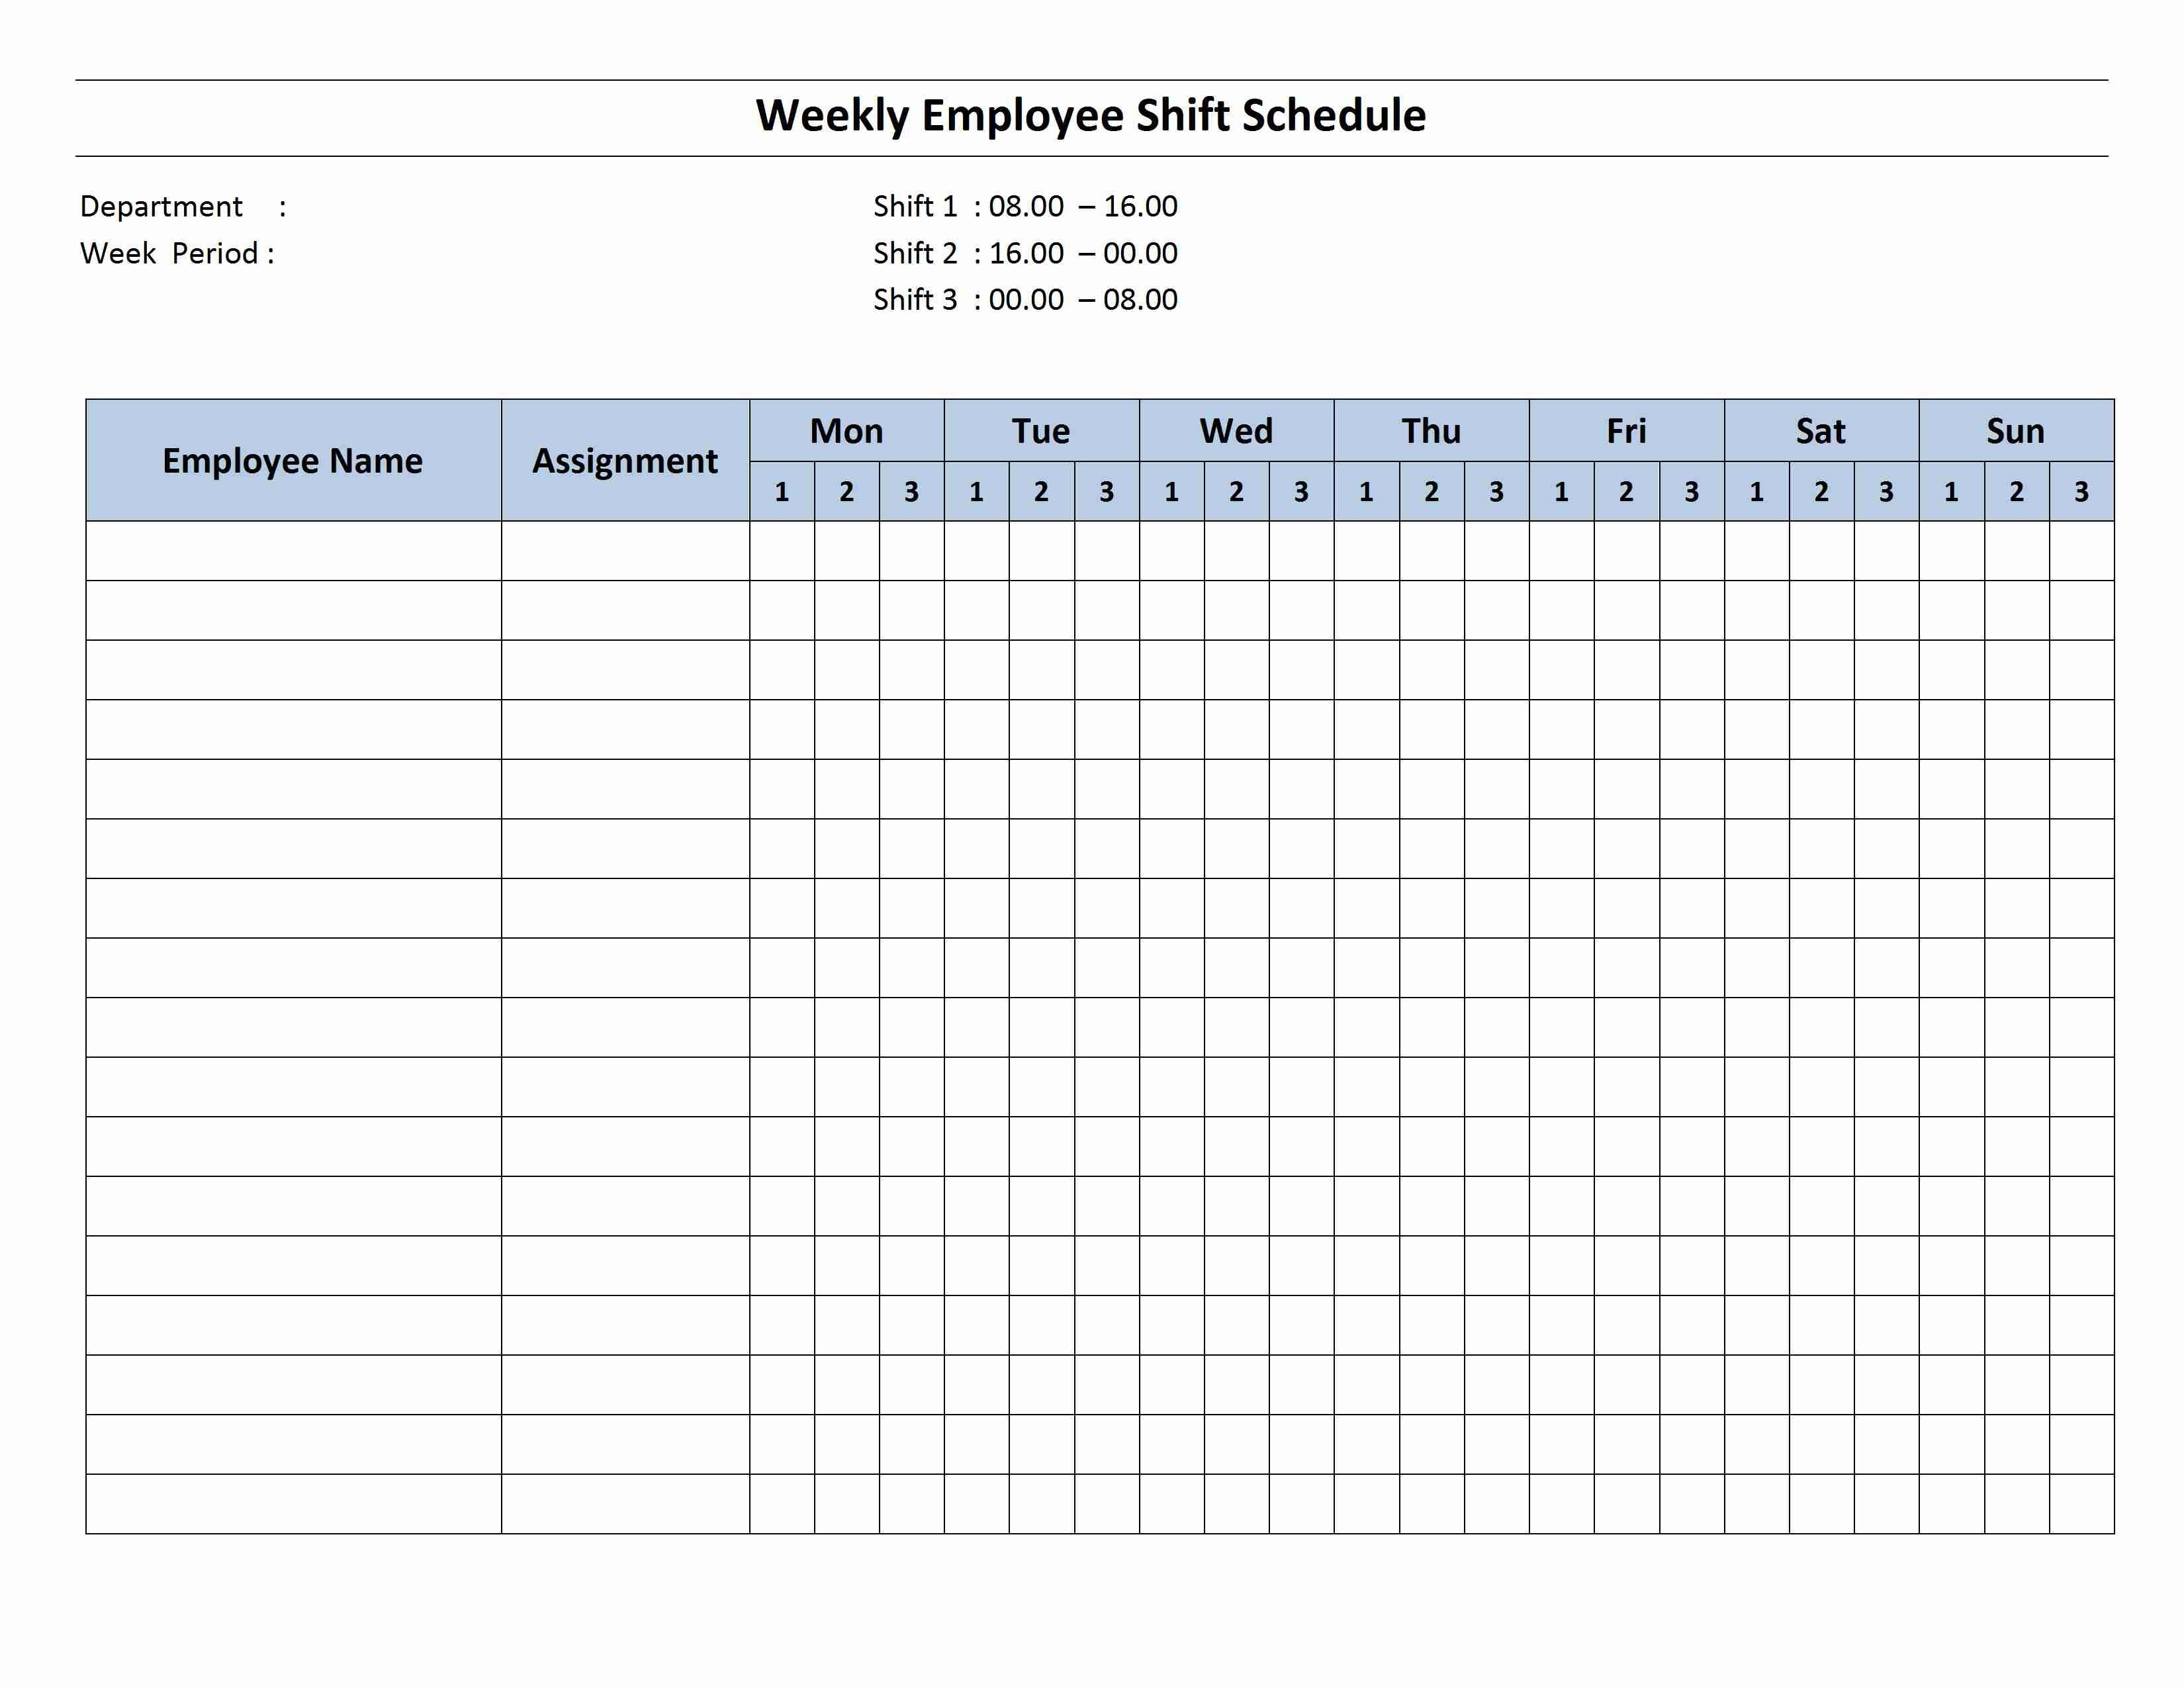 work schedule template for a week